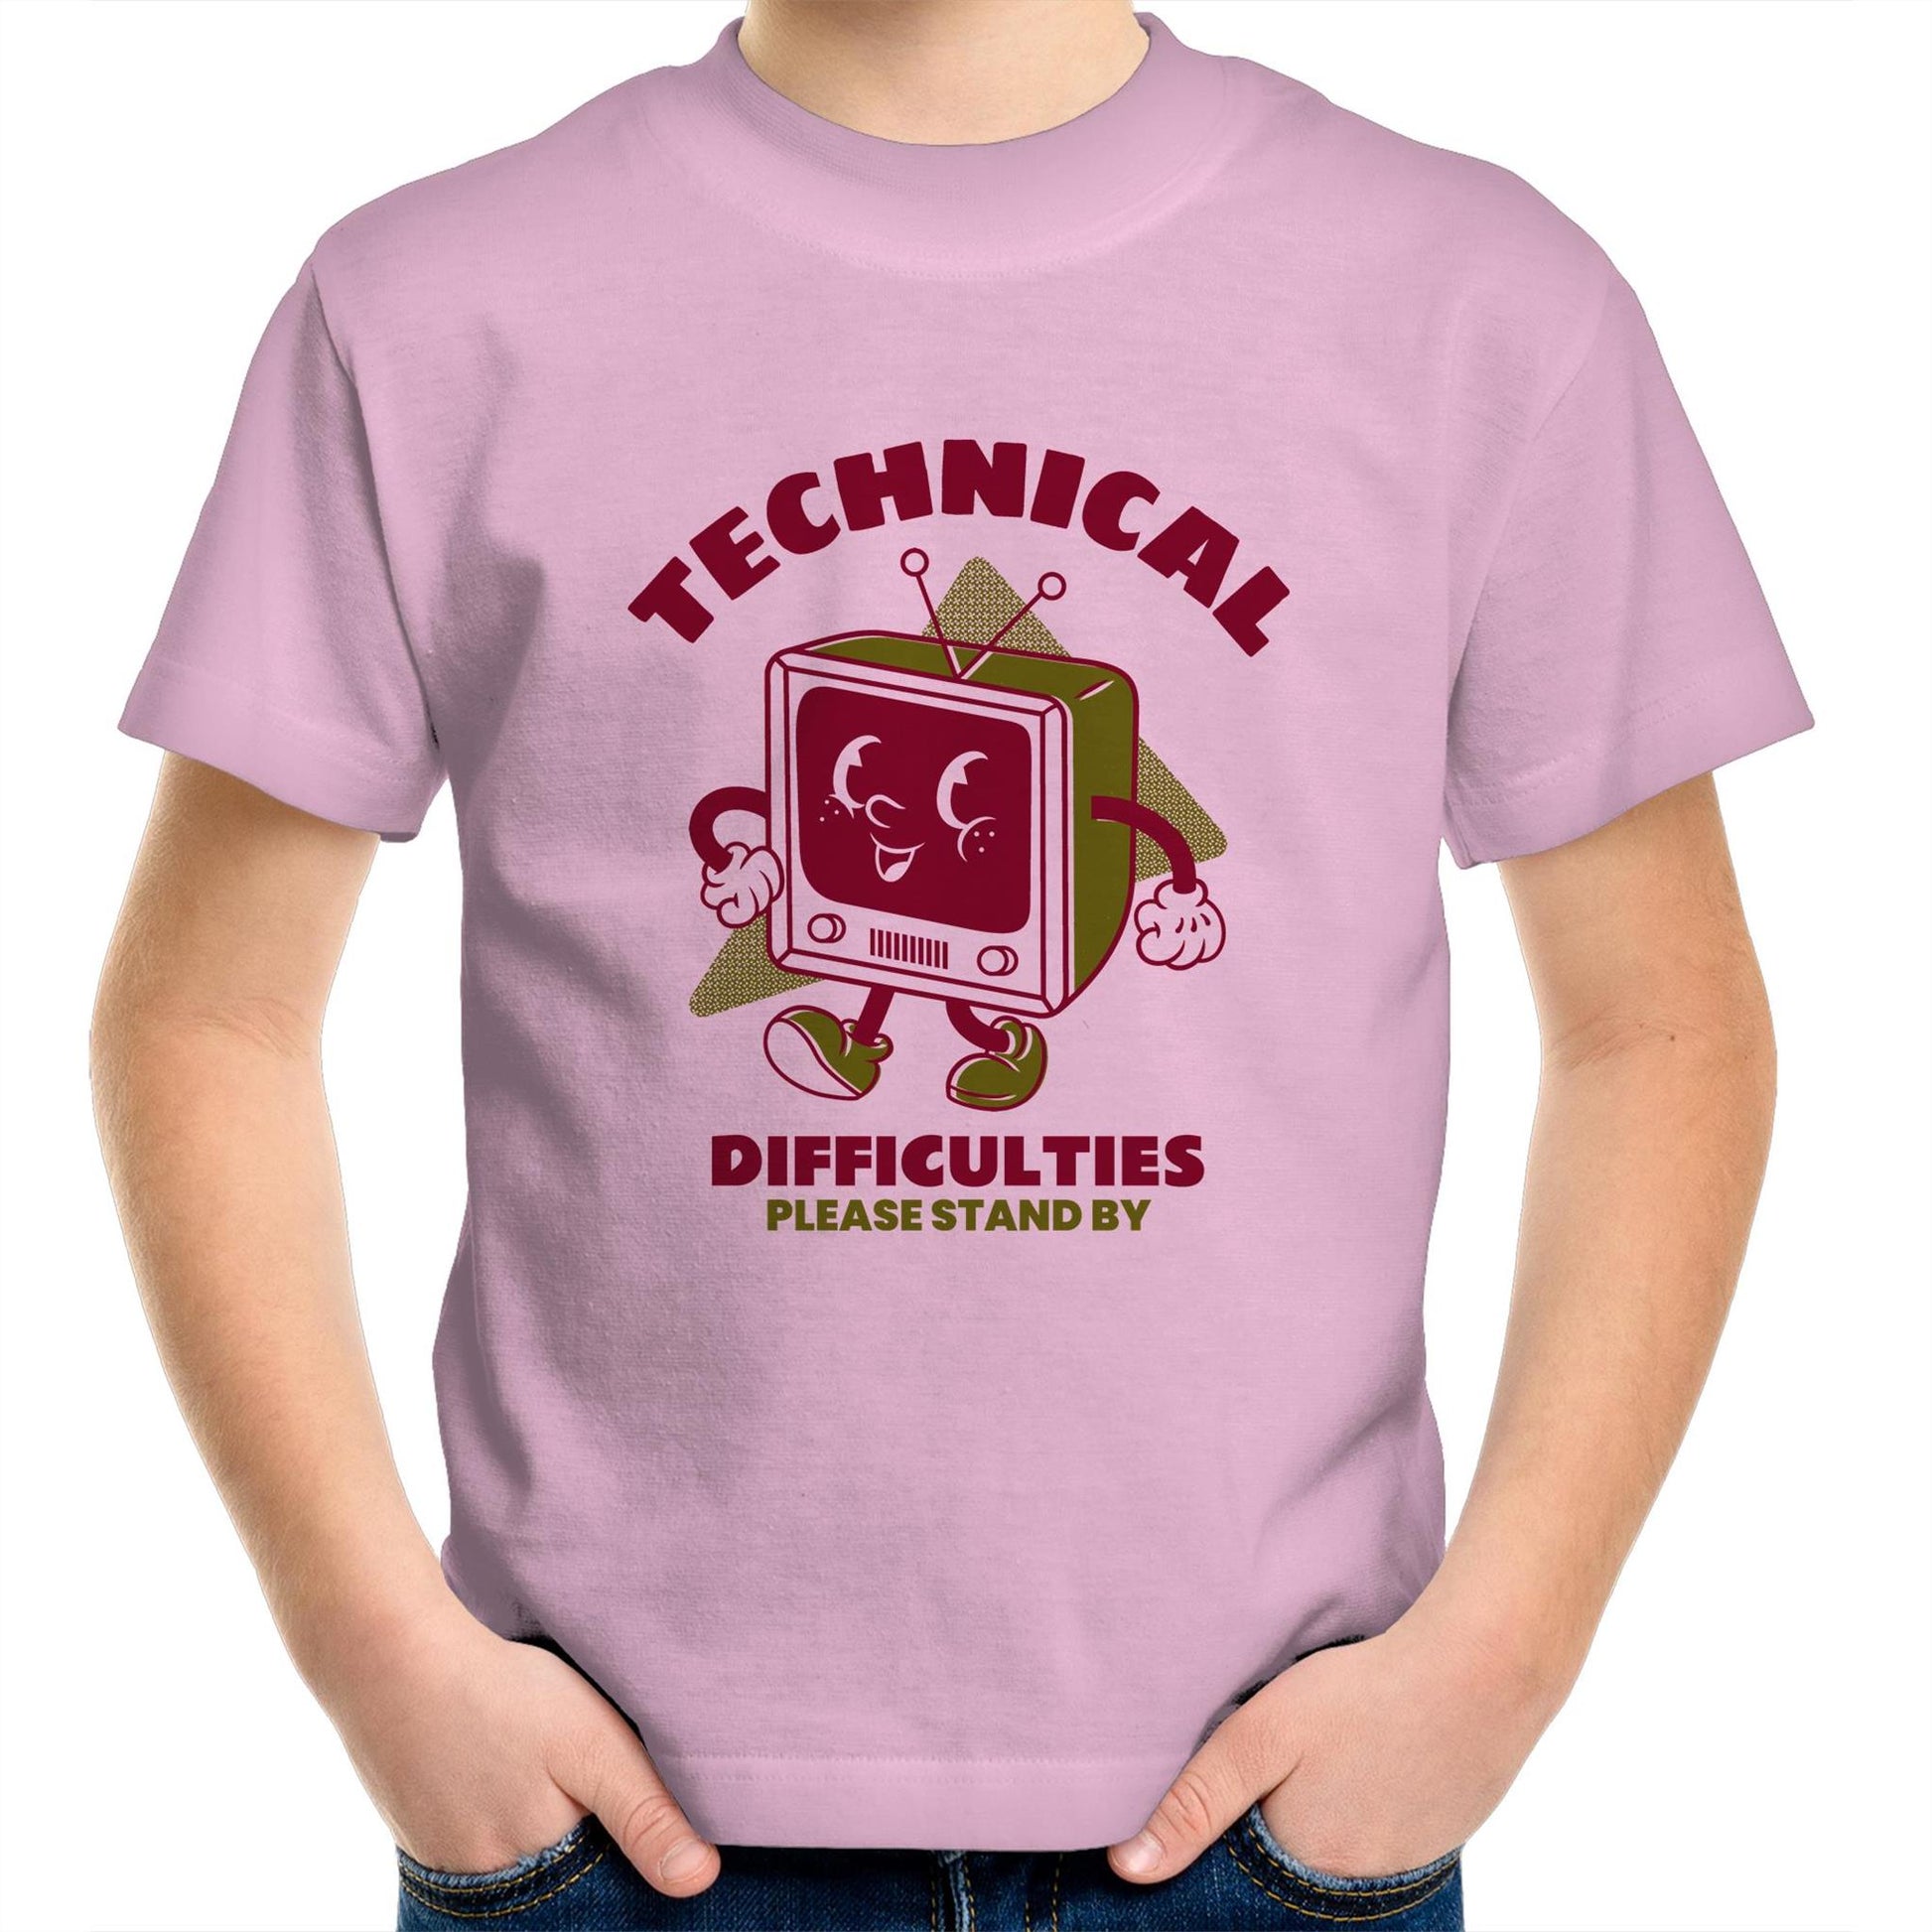 Retro TV Technical Difficulties - Kids Youth Crew T-Shirt Pink Kids Youth T-shirt Retro Tech